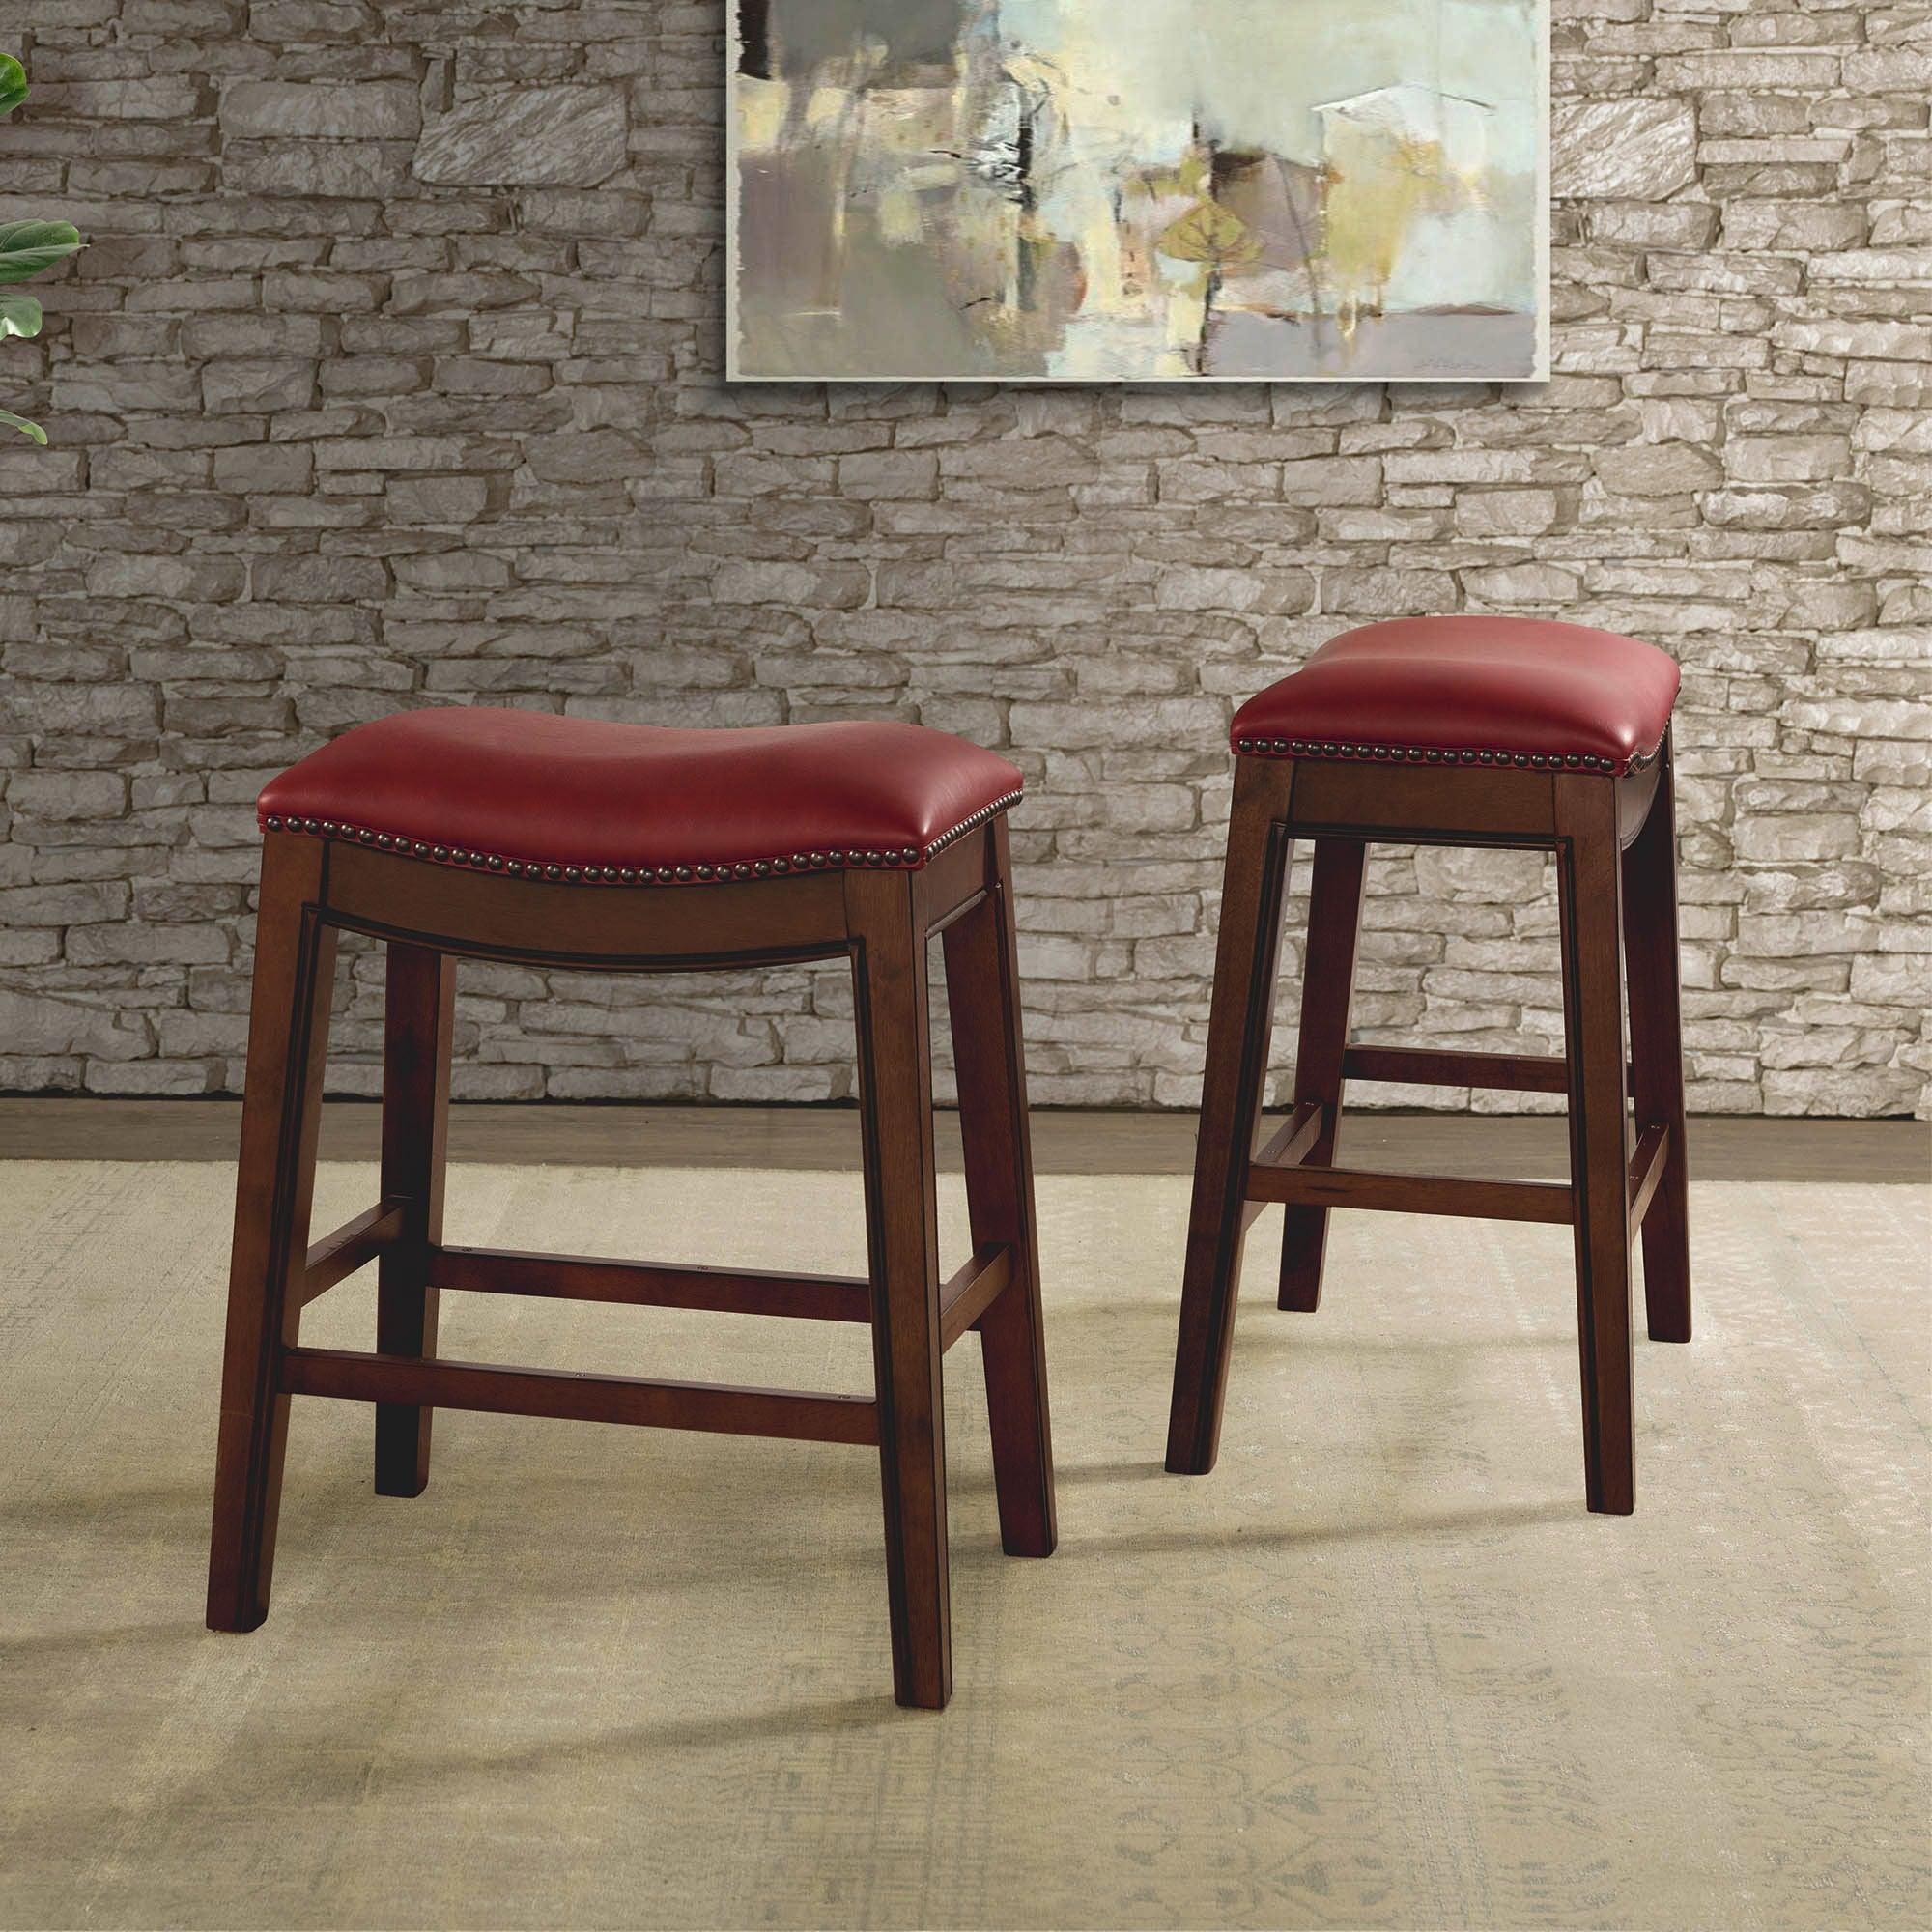 Elements Barstools - Bowen 24" Backless Counter Height Stool in Red